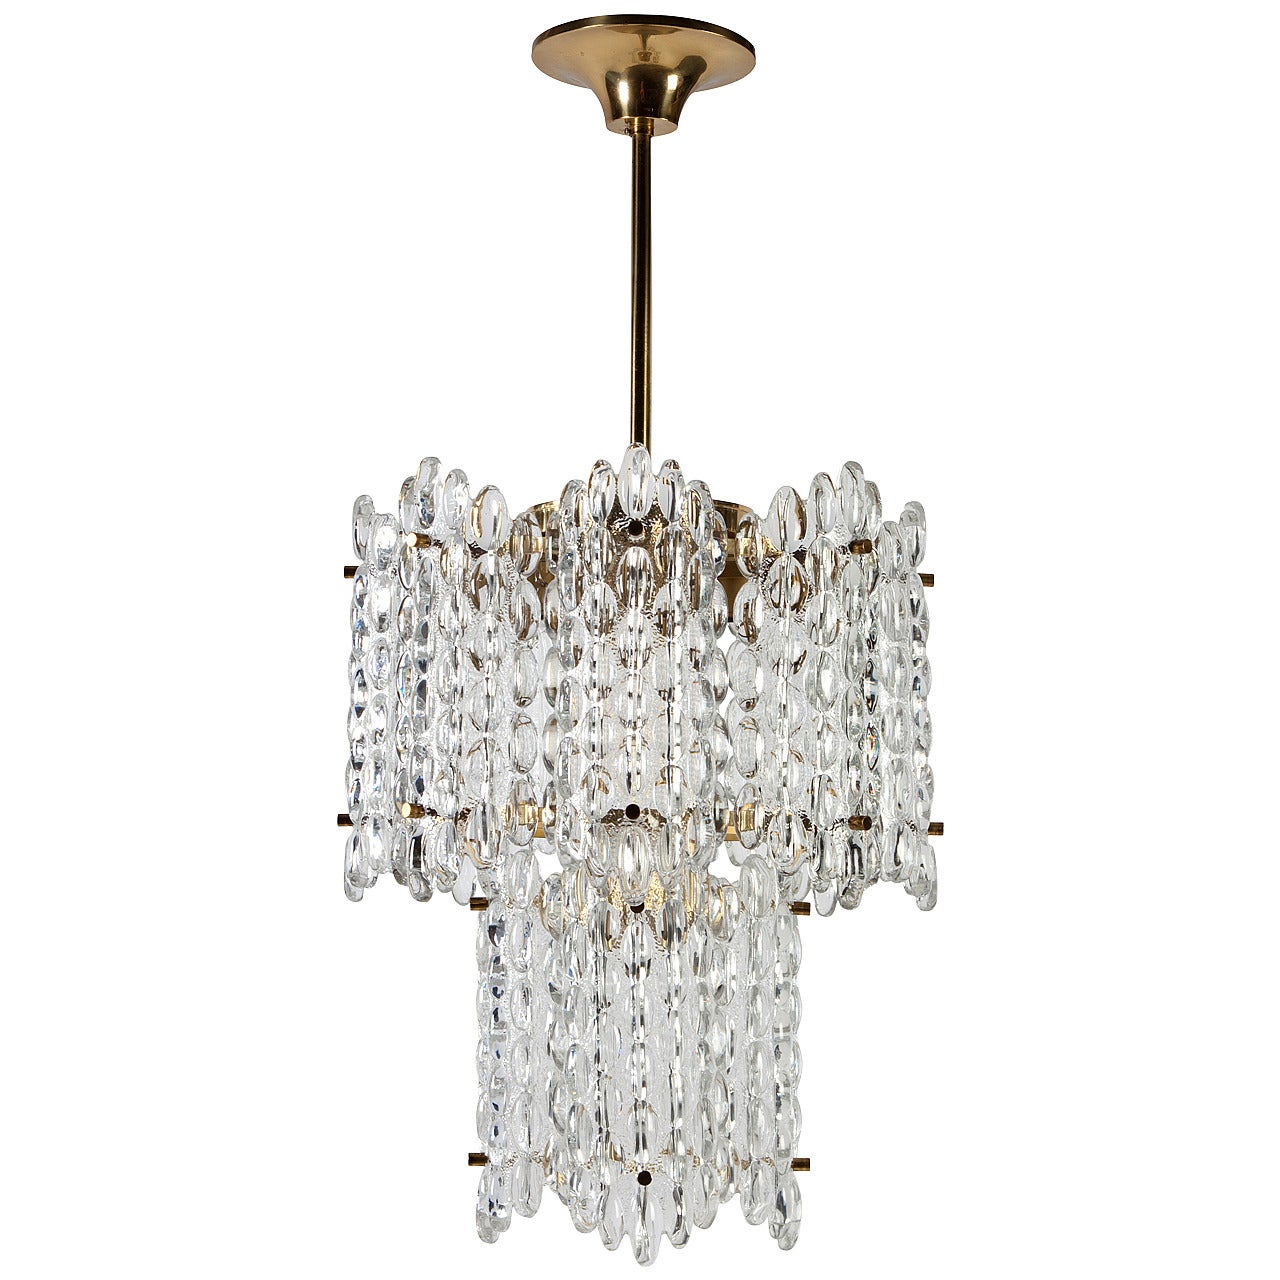 Orrefors Chandelier with Vintage Austrian Glass Designed by Carl Fagerlund